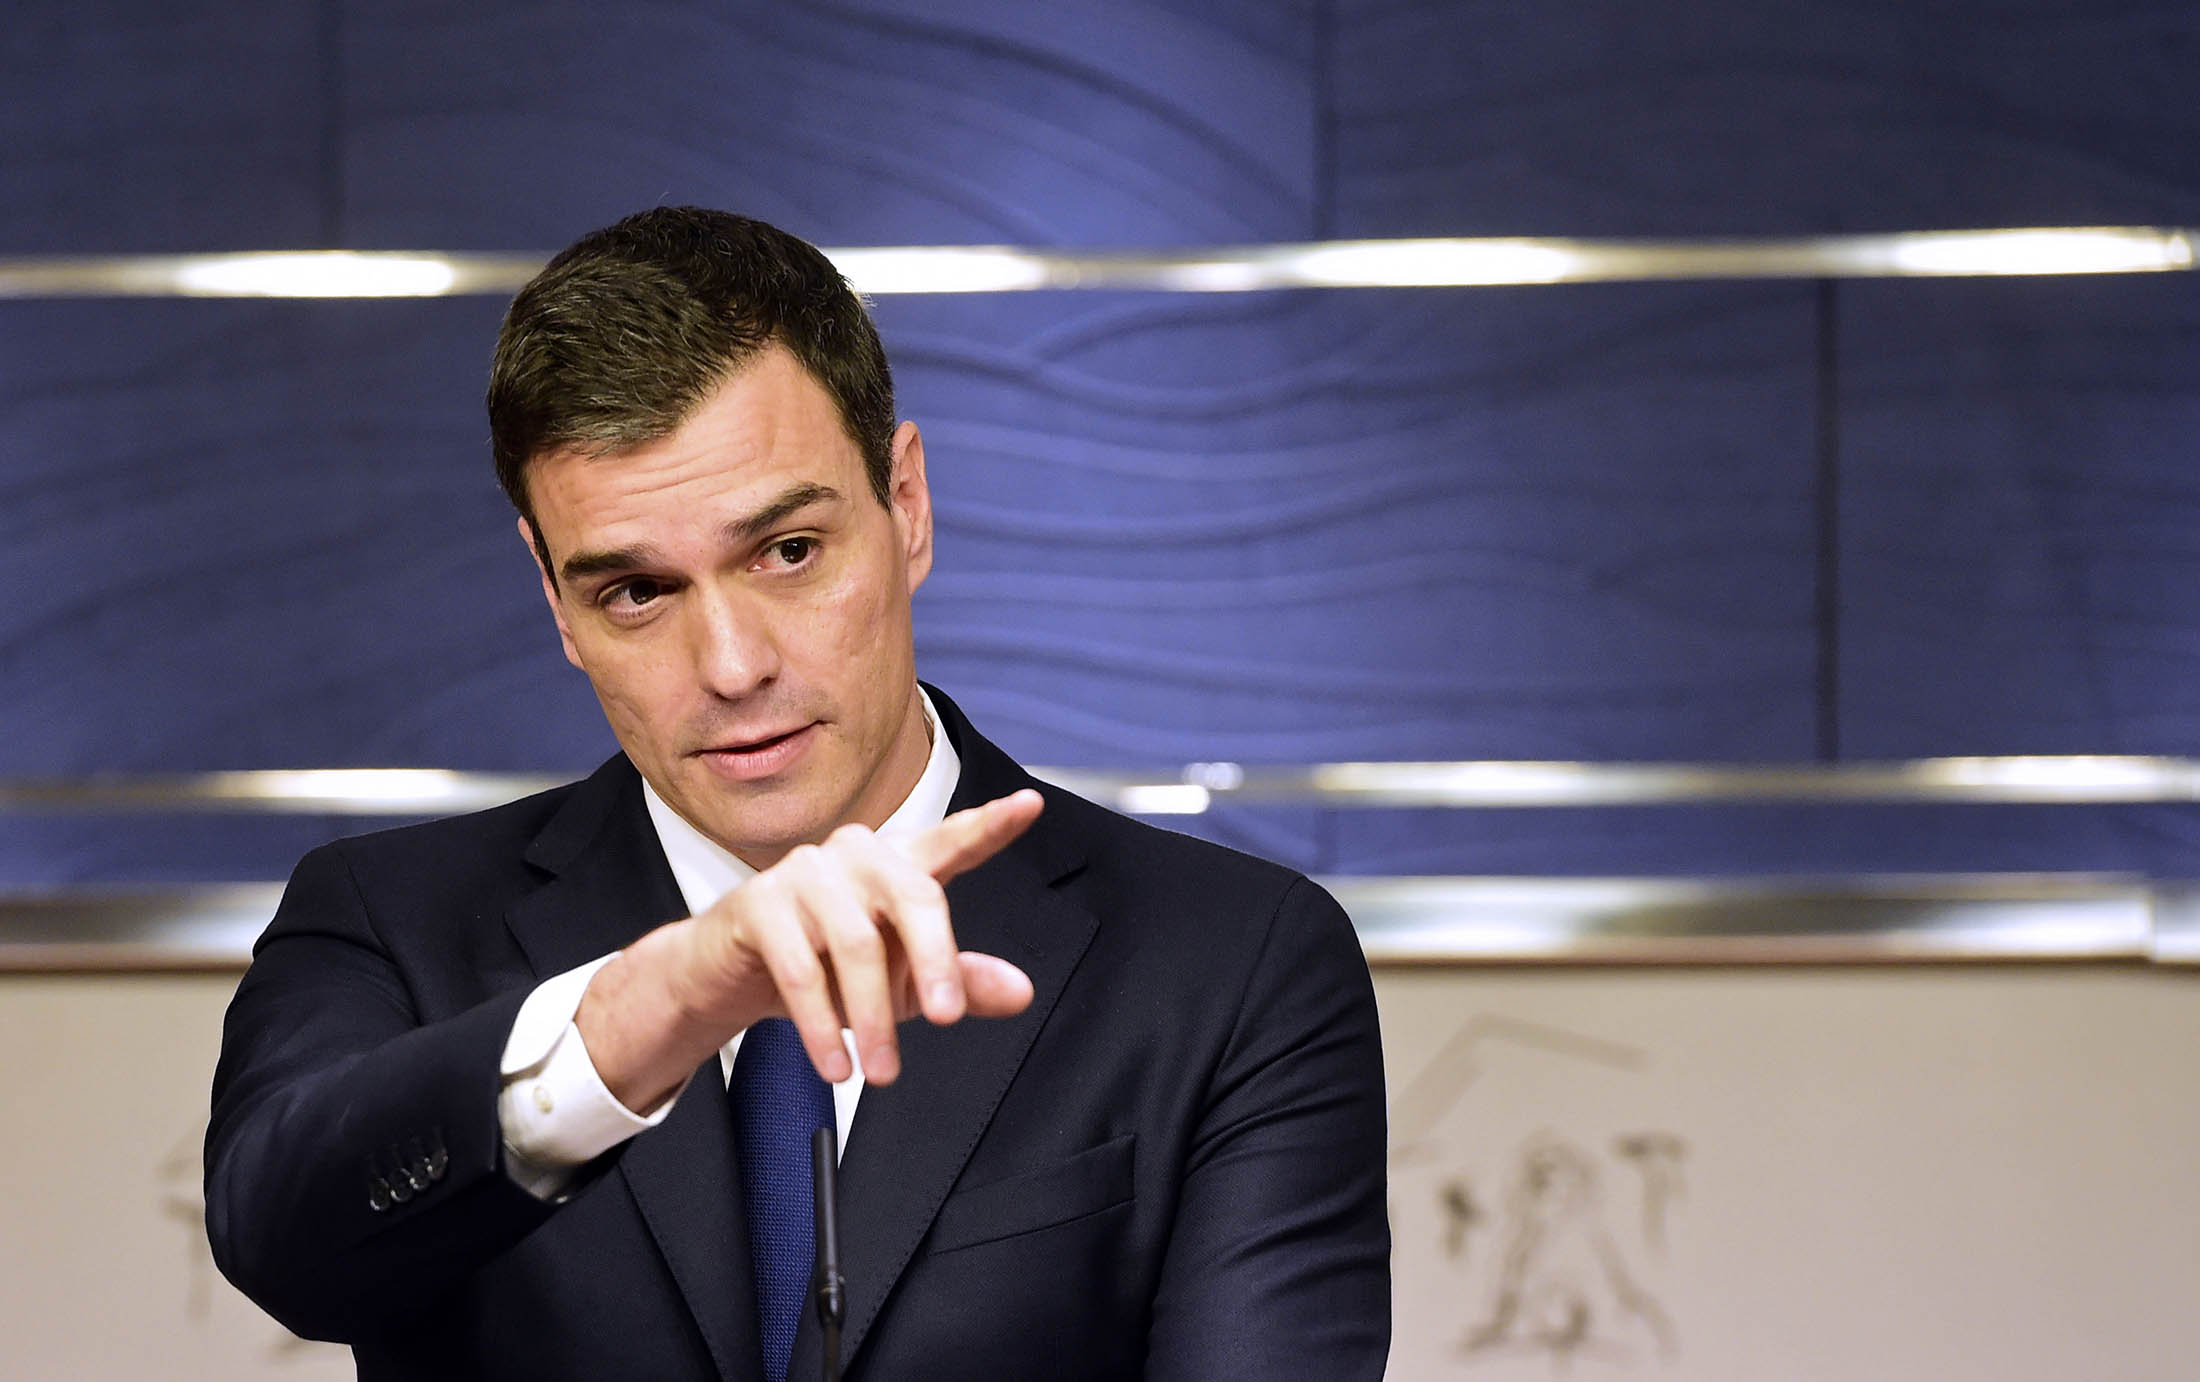 Leader of the Spanish Socialist Party (PSOE), Pedro Sanchez gestures during a press conference at the Spanish Parliament, following his meeting with Spain's King on January, 22, 2016. The leader of the Spanish Socialist Party today thanked the leader of the radical left party Podemos, their willingness to form a government with him, saying that first of all they should agree on a political program. AFP PHOTO / JAVIER SORIANO / AFP / JAVIER SORIANO (Photo credit should read JAVIER SORIANO/AFP/Getty Images)
